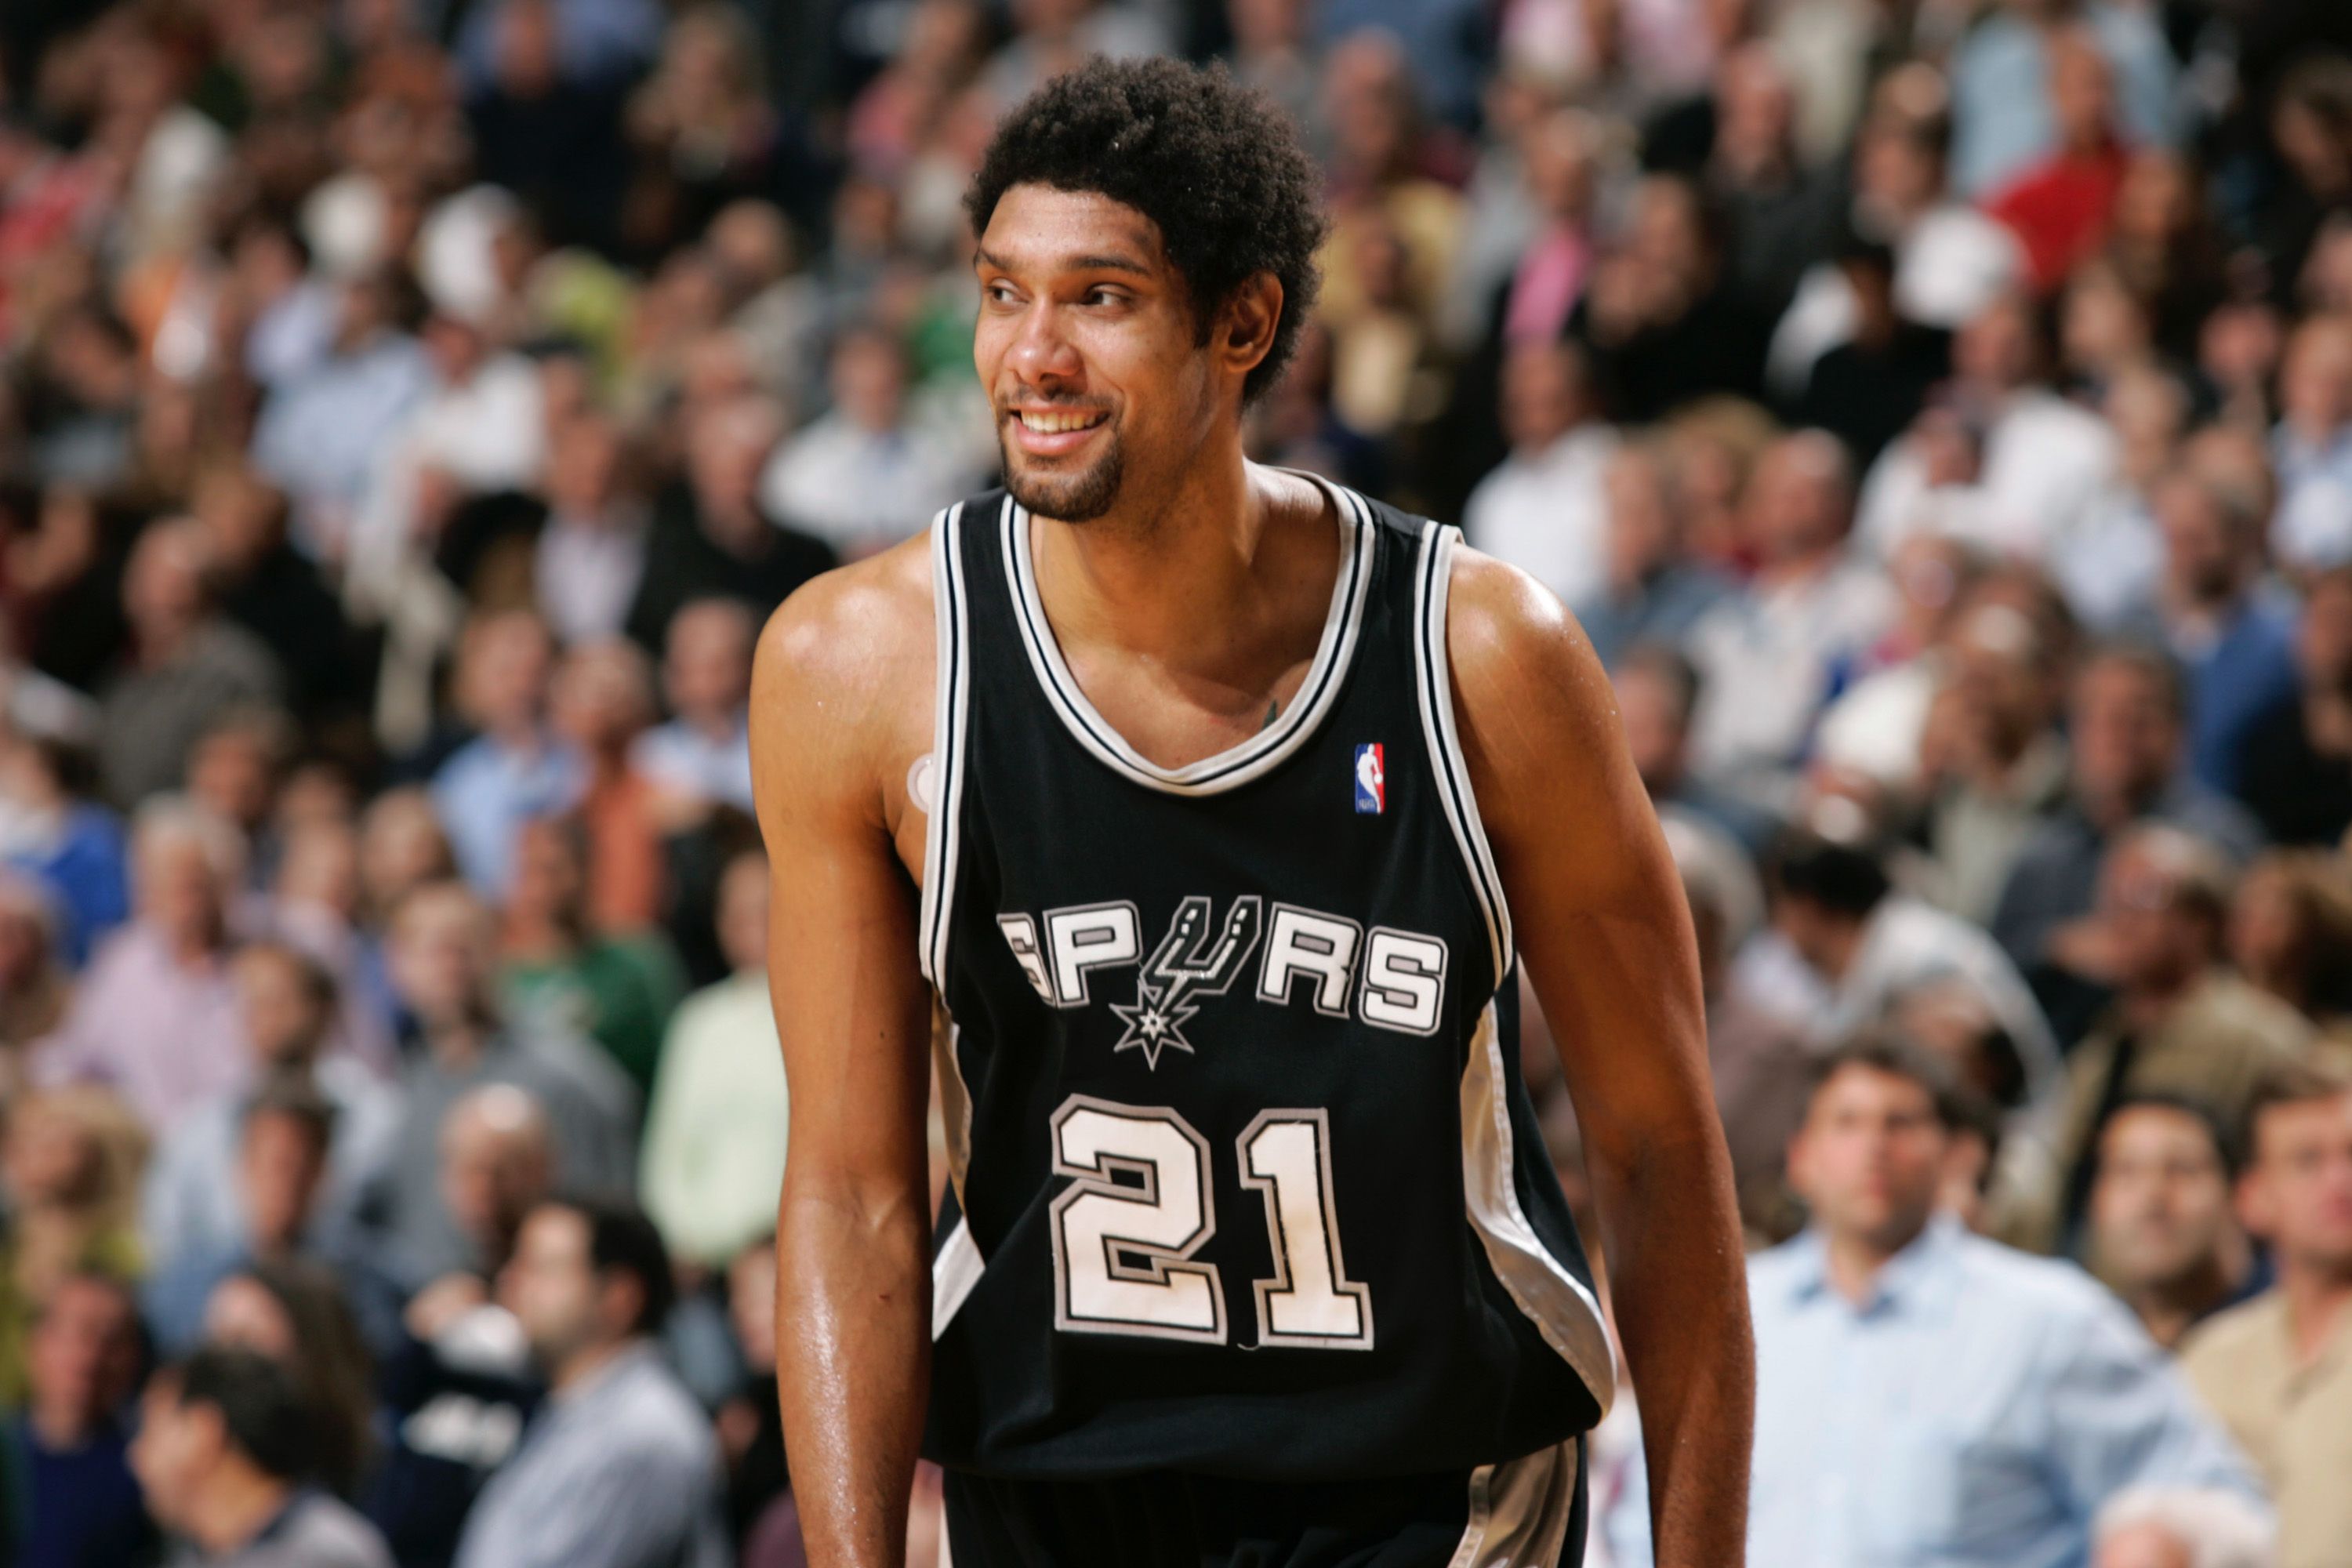 Tim Duncan smiles after his team pulled out a 92-90 win against the Dallas Mavericks December 1, 2005 at American Airlines Center in Dallas, Texas. | Source: Getty Images